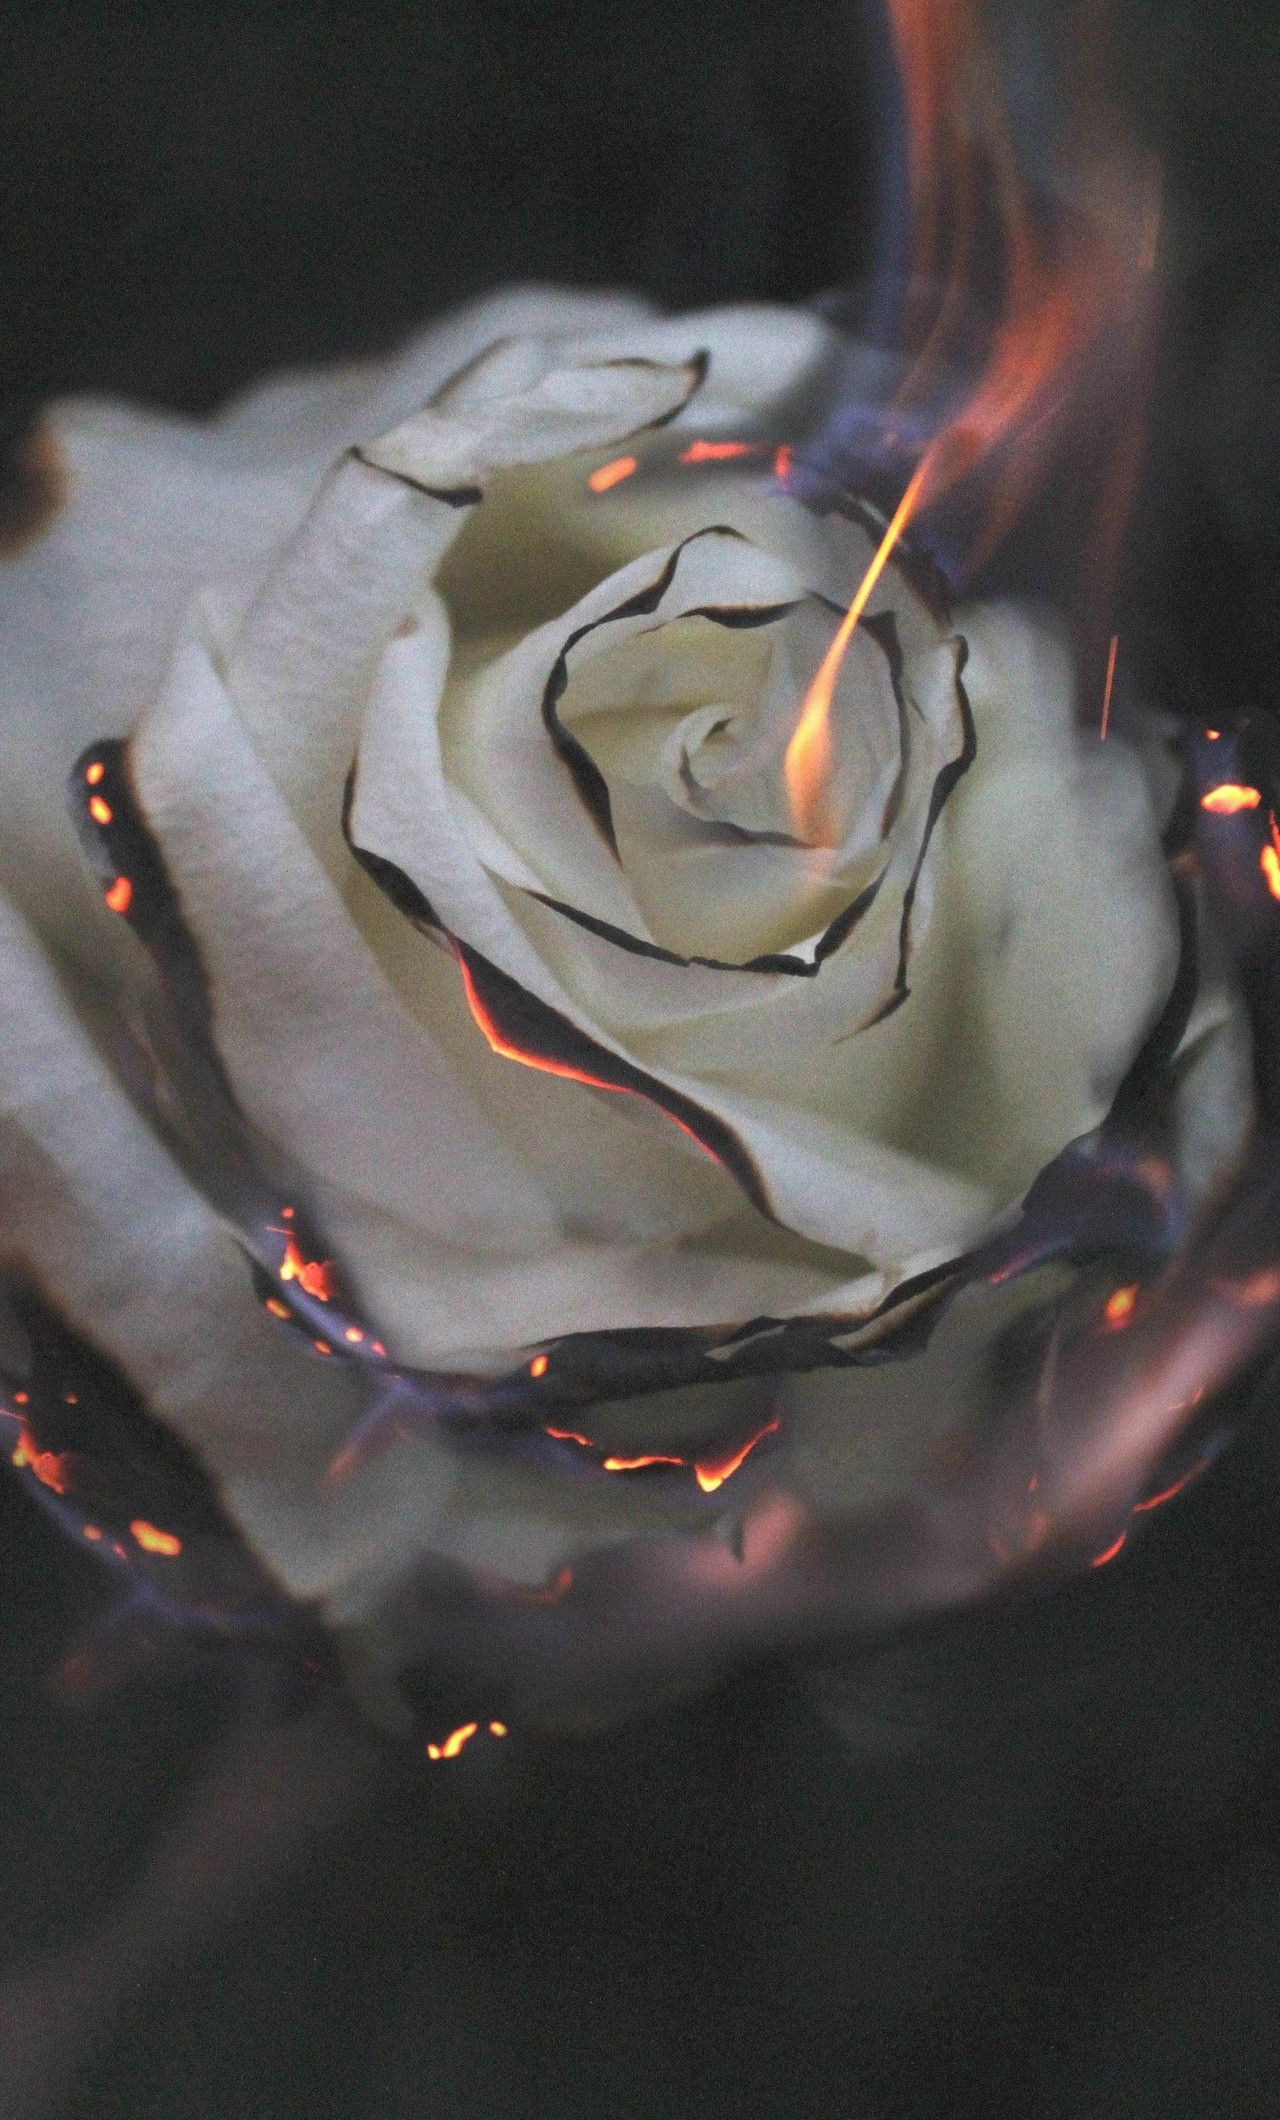 A white rose is on fire - Fire, smoke